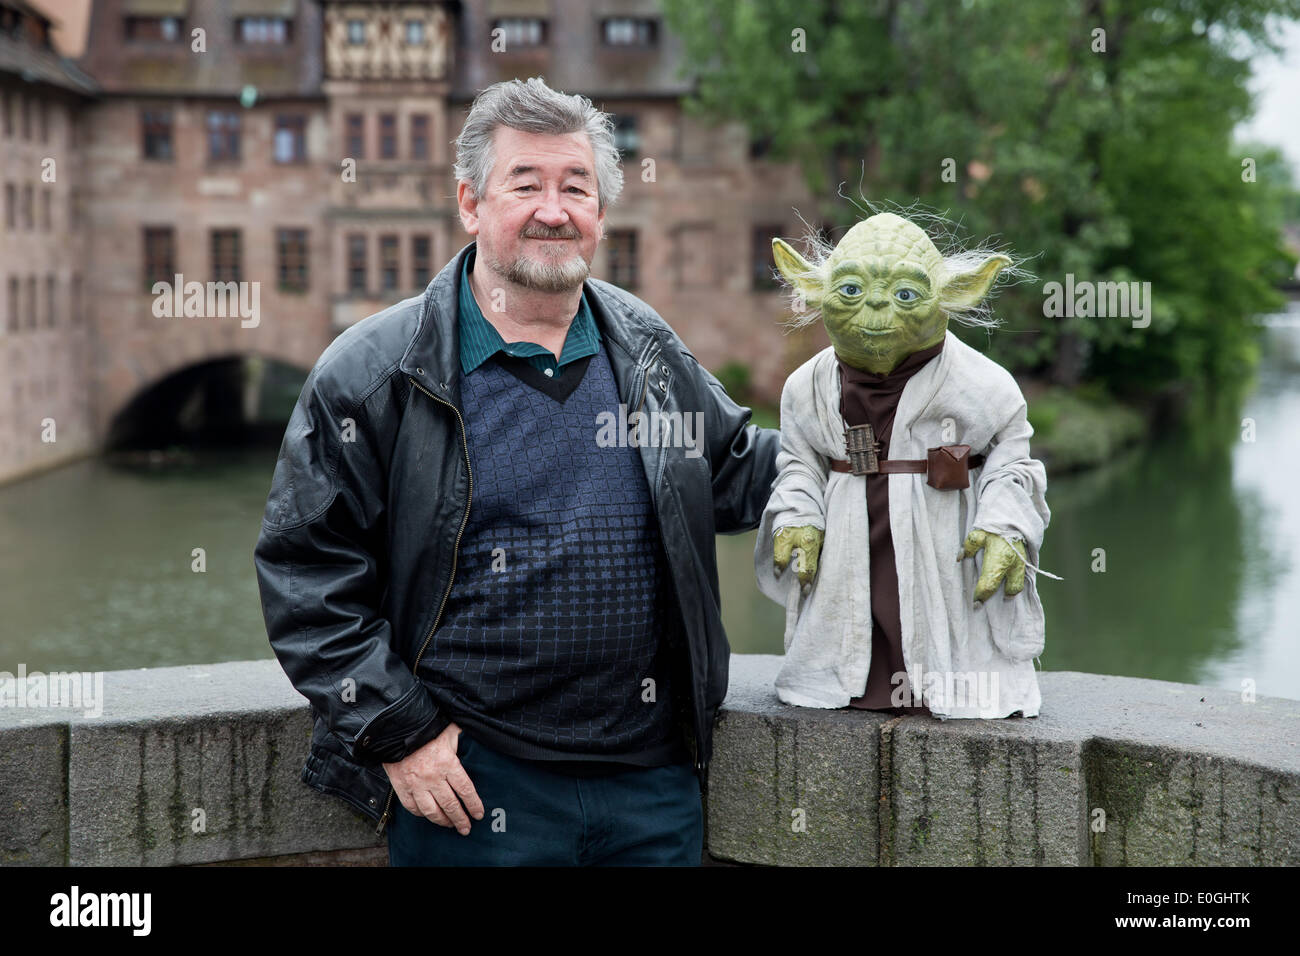 Nuremberg, Germany. 07th May, 2014. Make-up artist Nick Maley, one of the designers of Yoda from the science fiction film Star Wars stands with a Yoga figure at the old town in Nuremberg, Germany, 07 May 2014. 64 year-old is planning a new museum for special effects, fantasy and science fiction films in Nuremberg. Photo: DANIEL KARMANN/dpa/Alamy Live News Stock Photo